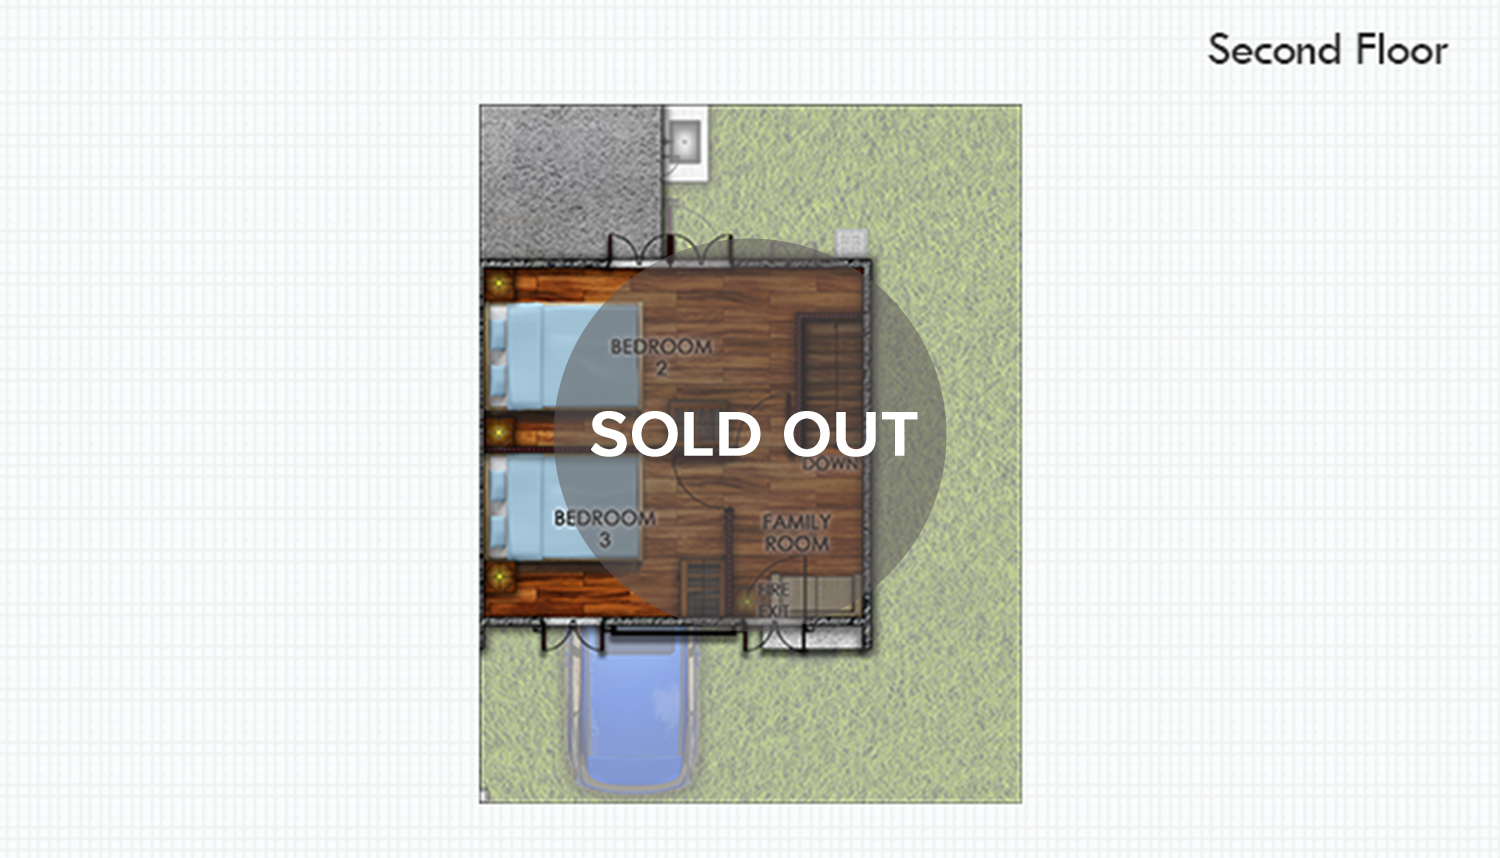 /assets/properties-house-model-gallery-and-landmarks-icons/lumina-home-models/home-model-gallery/athena-duplex/lumina-athena-duplex-second-floor-plan-sold-out.png